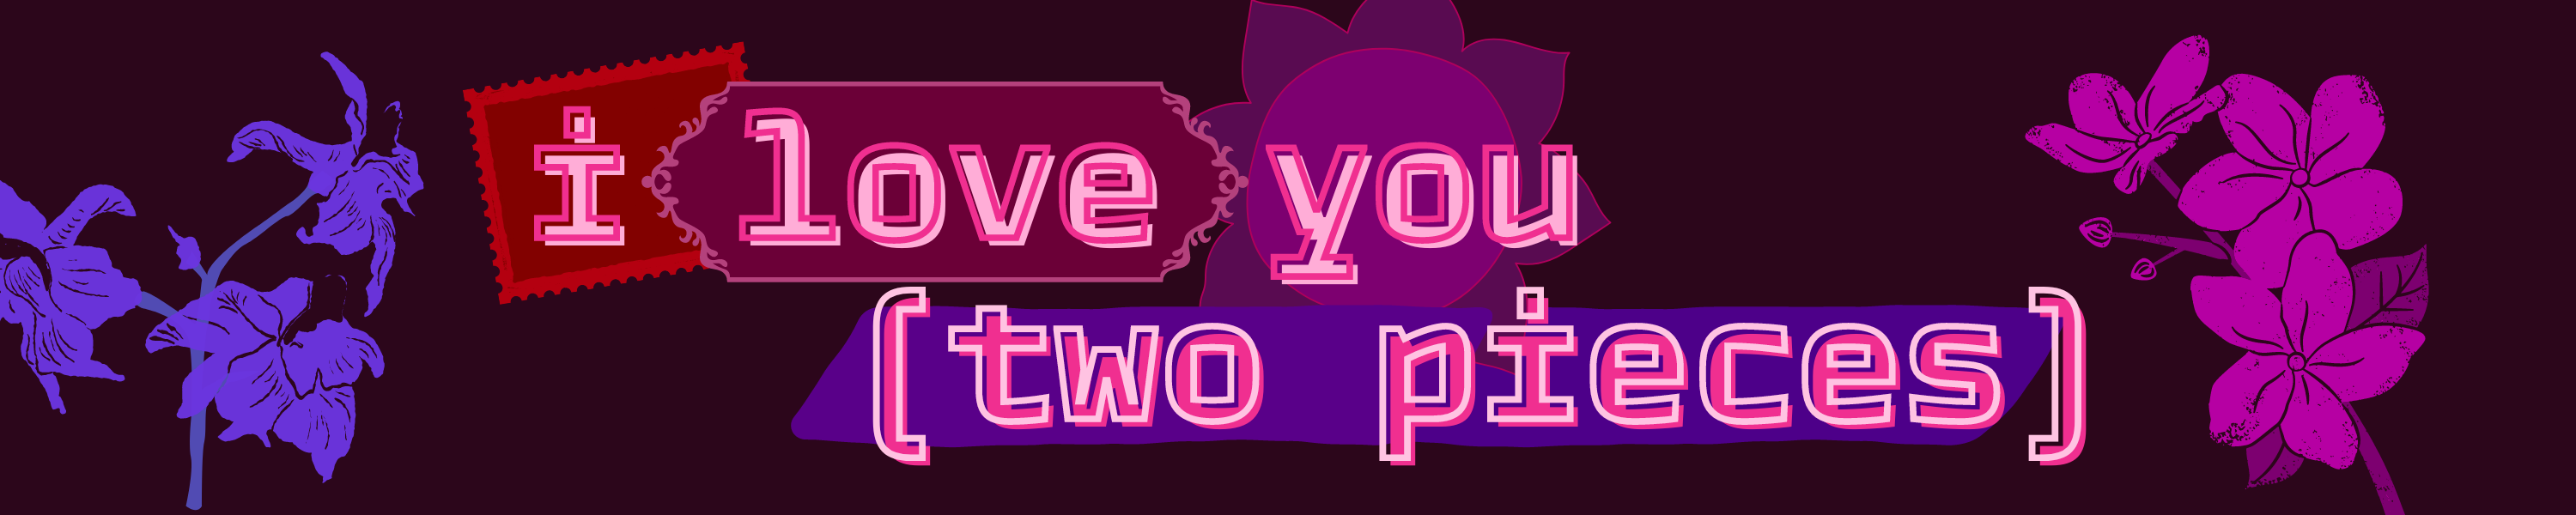 i love you (two pieces)